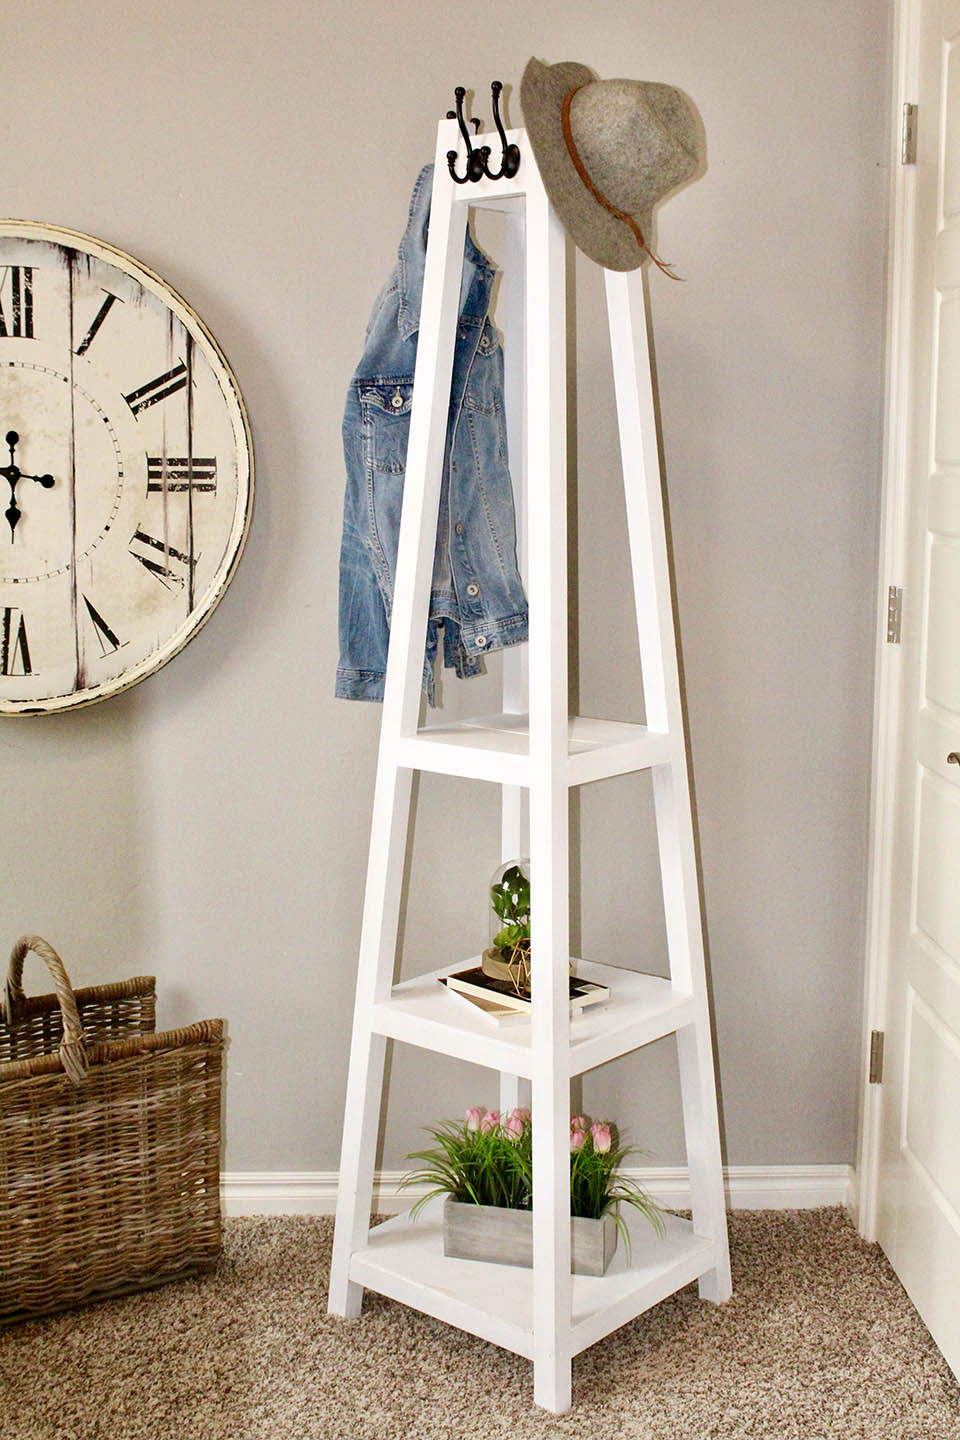 … You can hang your hat on this coat rack.